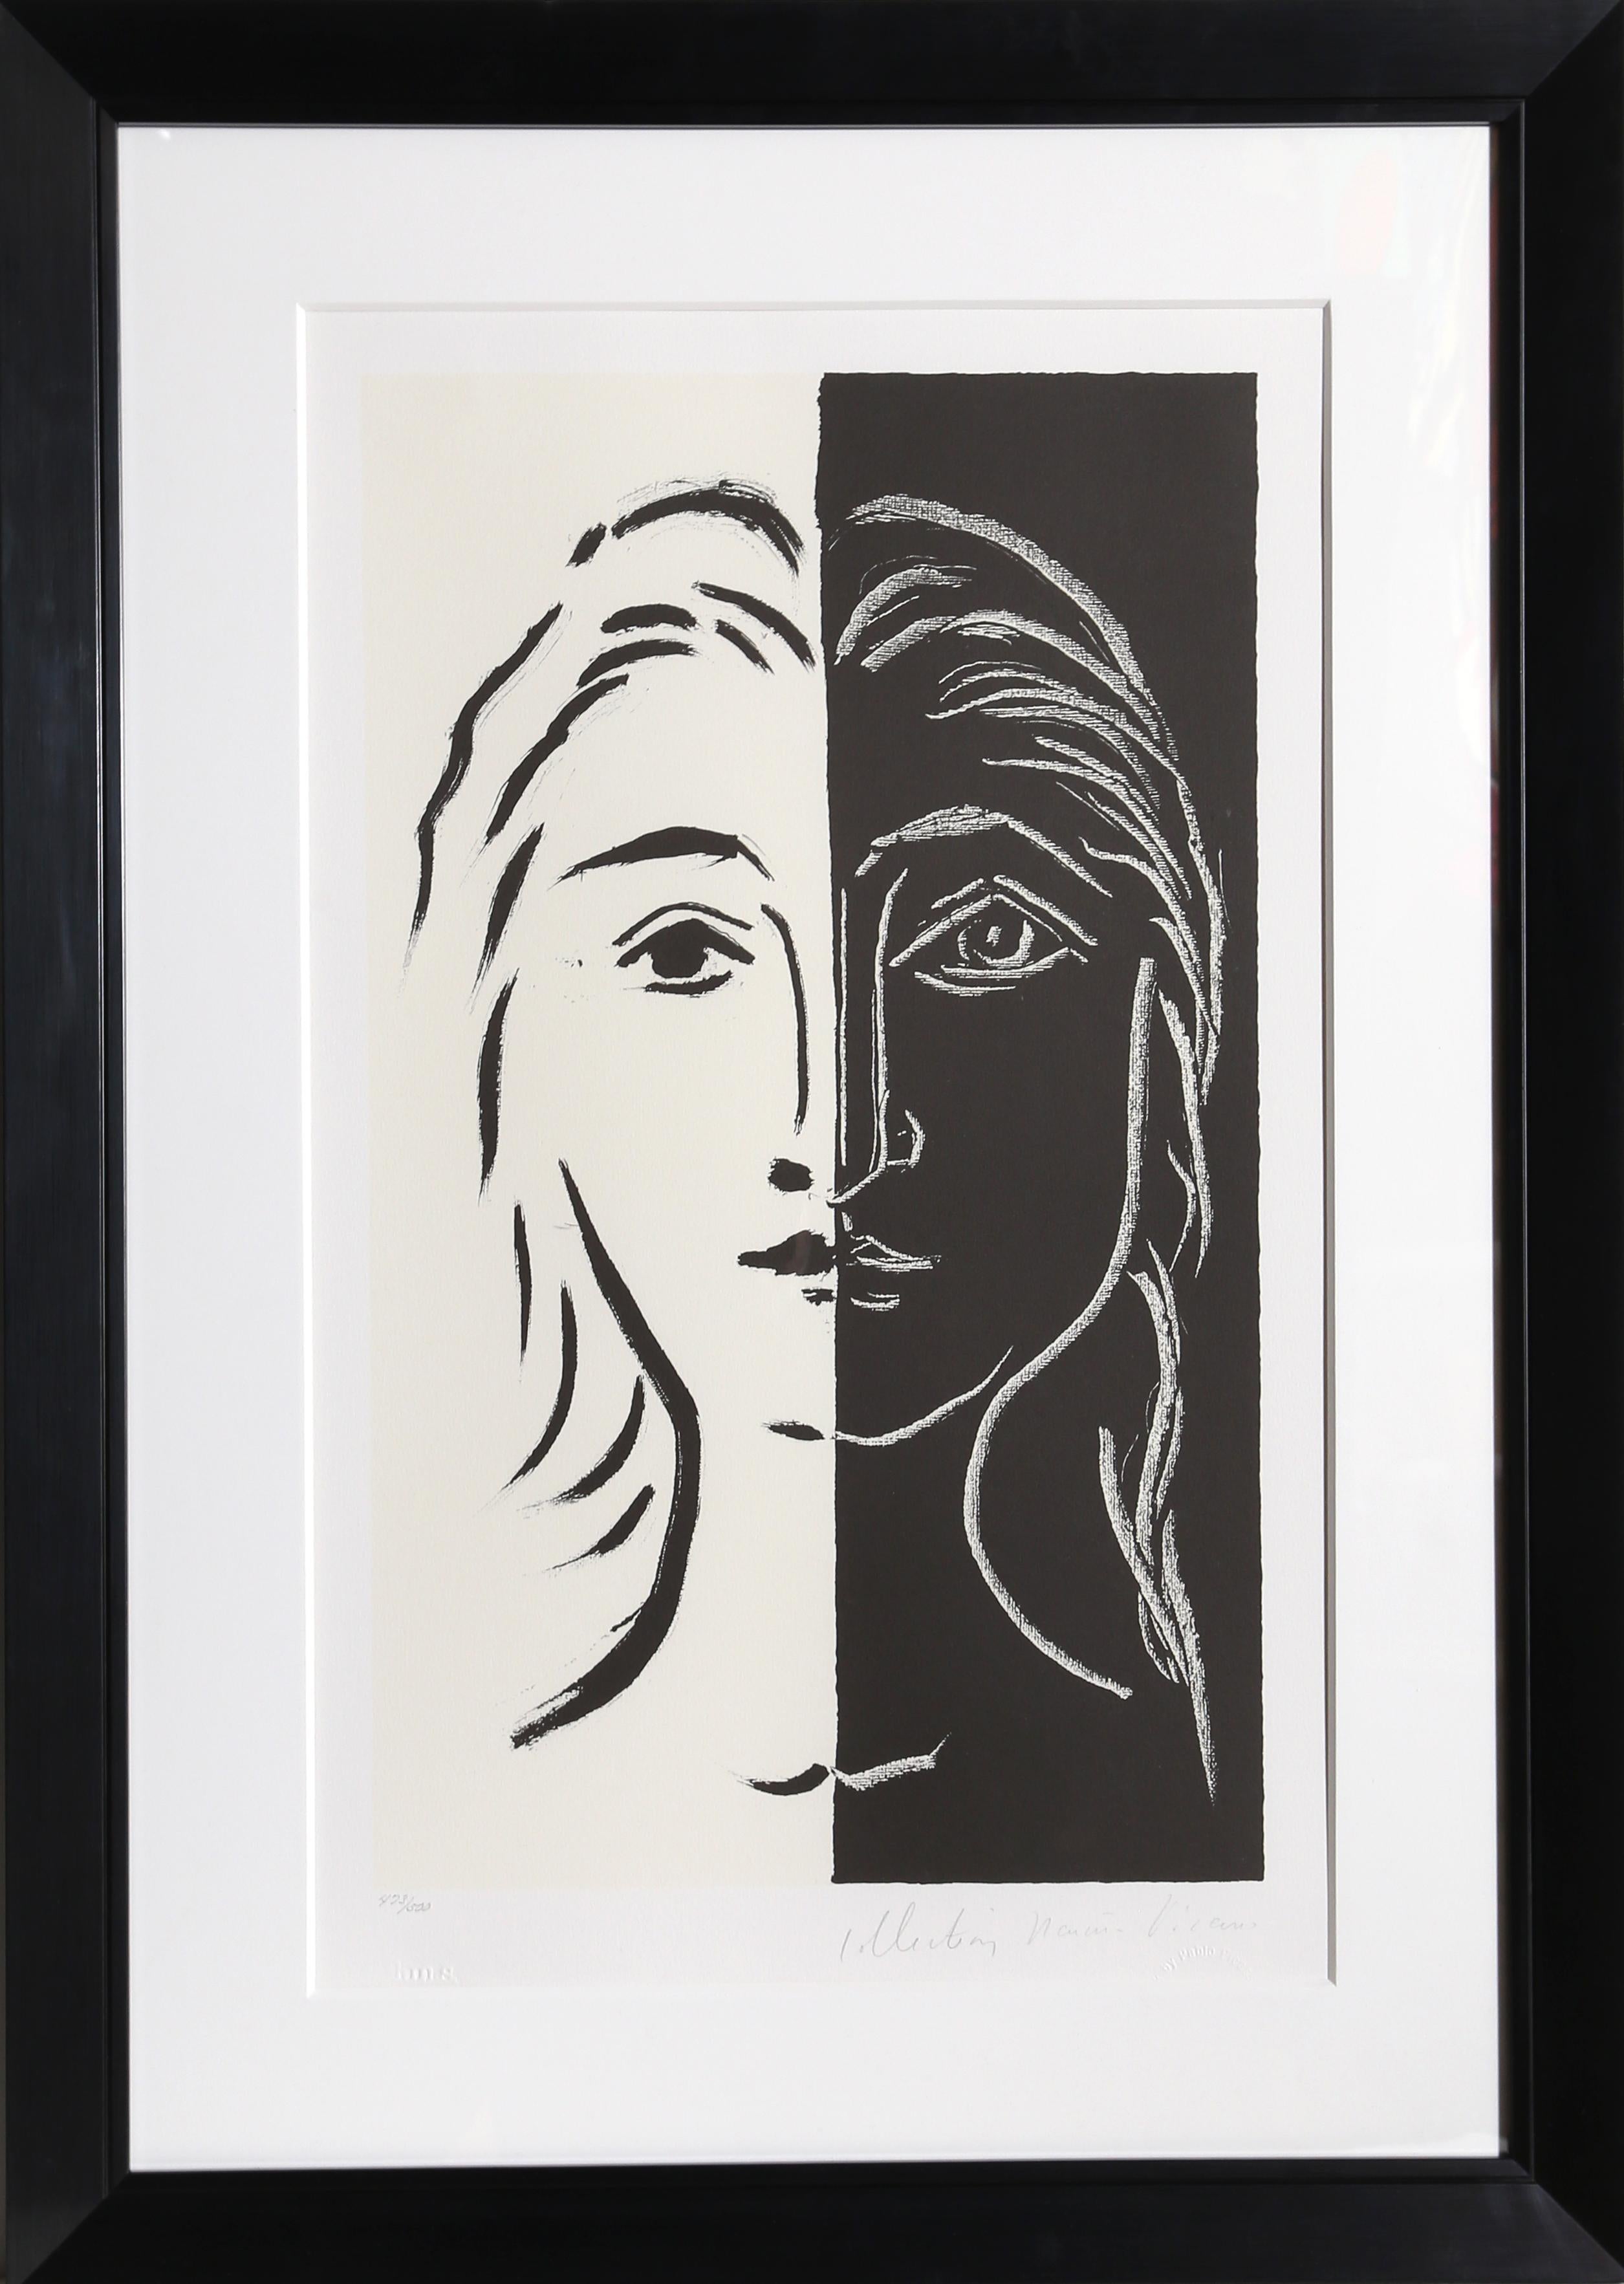 A lithograph from the Marina Picasso Estate Collection after the Pablo Picasso painting "Portrait en Deux Parties Noire et Blanche".  The original painting was completed in 1924. In the 1970's after Picasso's death, Marina Picasso, his